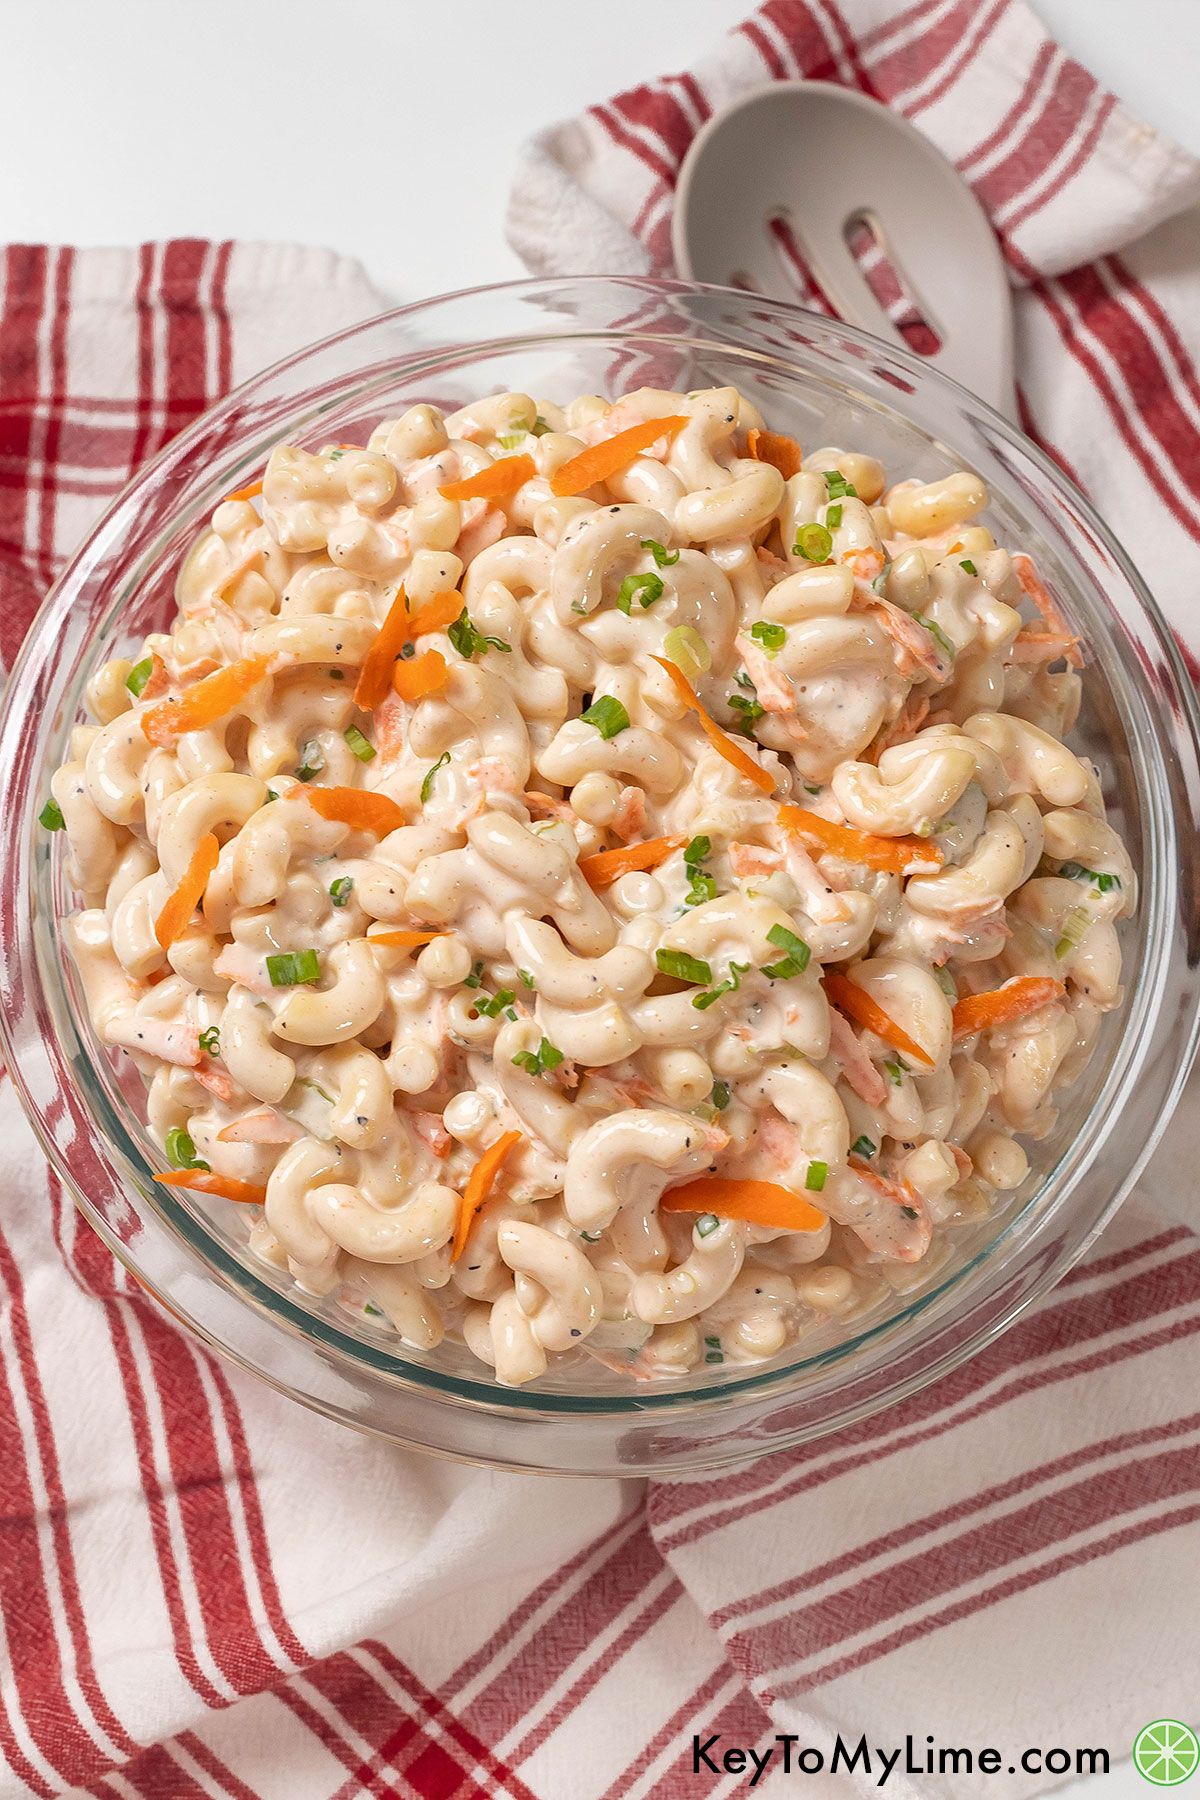 A large mixing bowl full of macaroni salad garnished with fresh green onion.